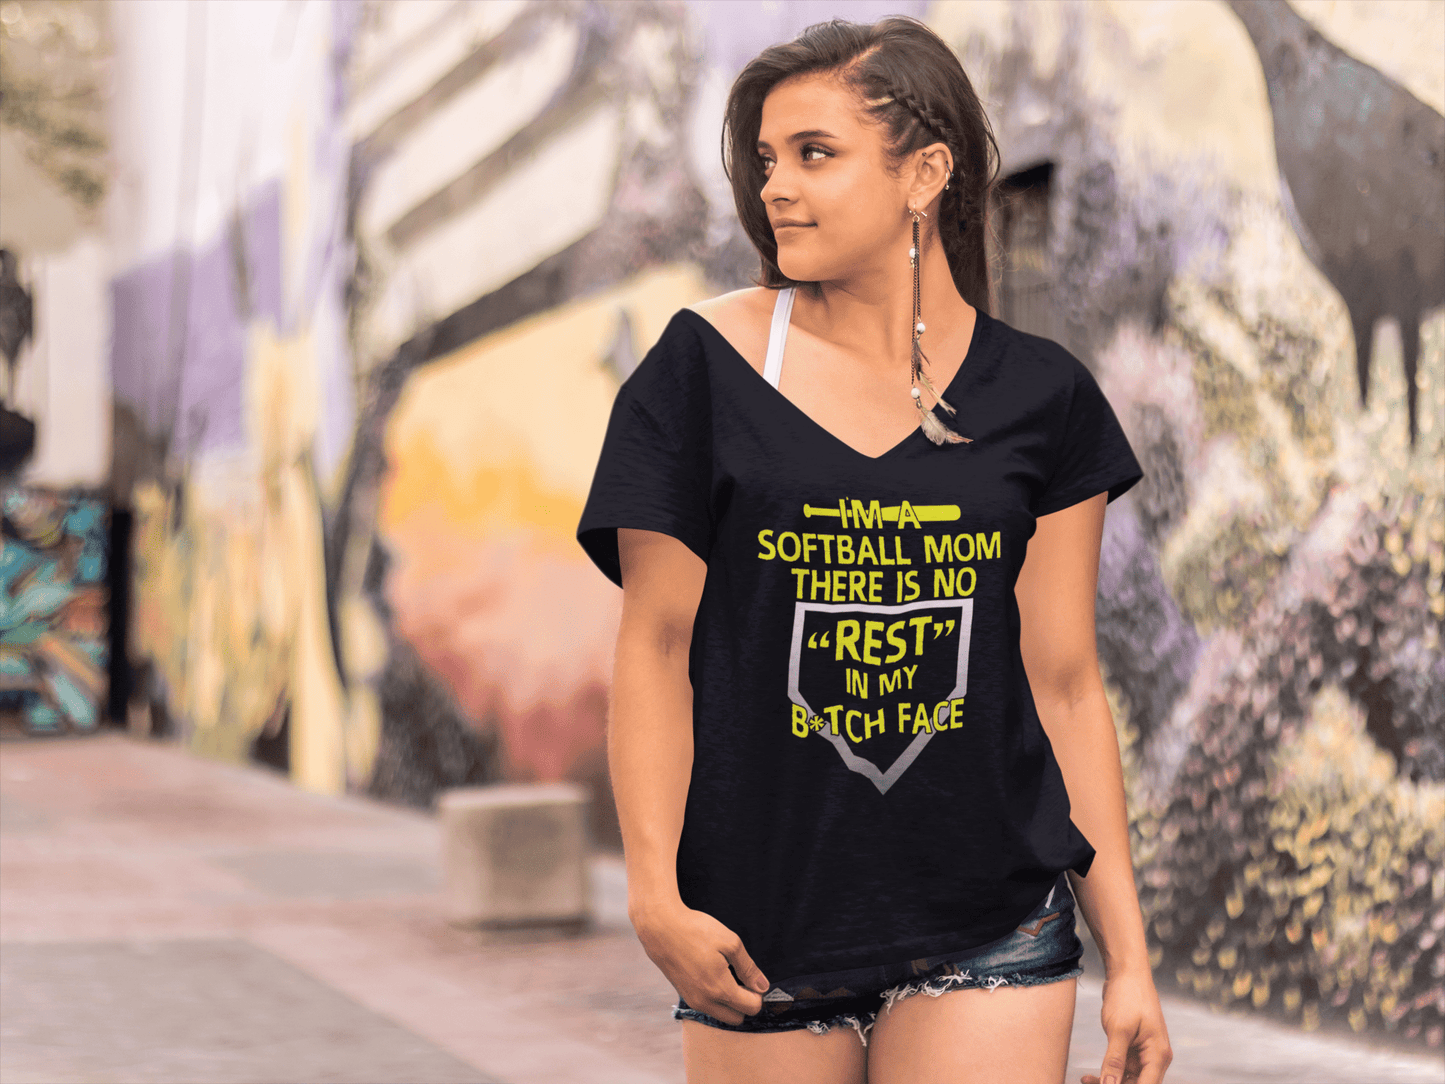 ULTRABASIC Damen-T-Shirt „I'm a Softball Mom There is No Rest in My Face“ – lustiges T-Shirt